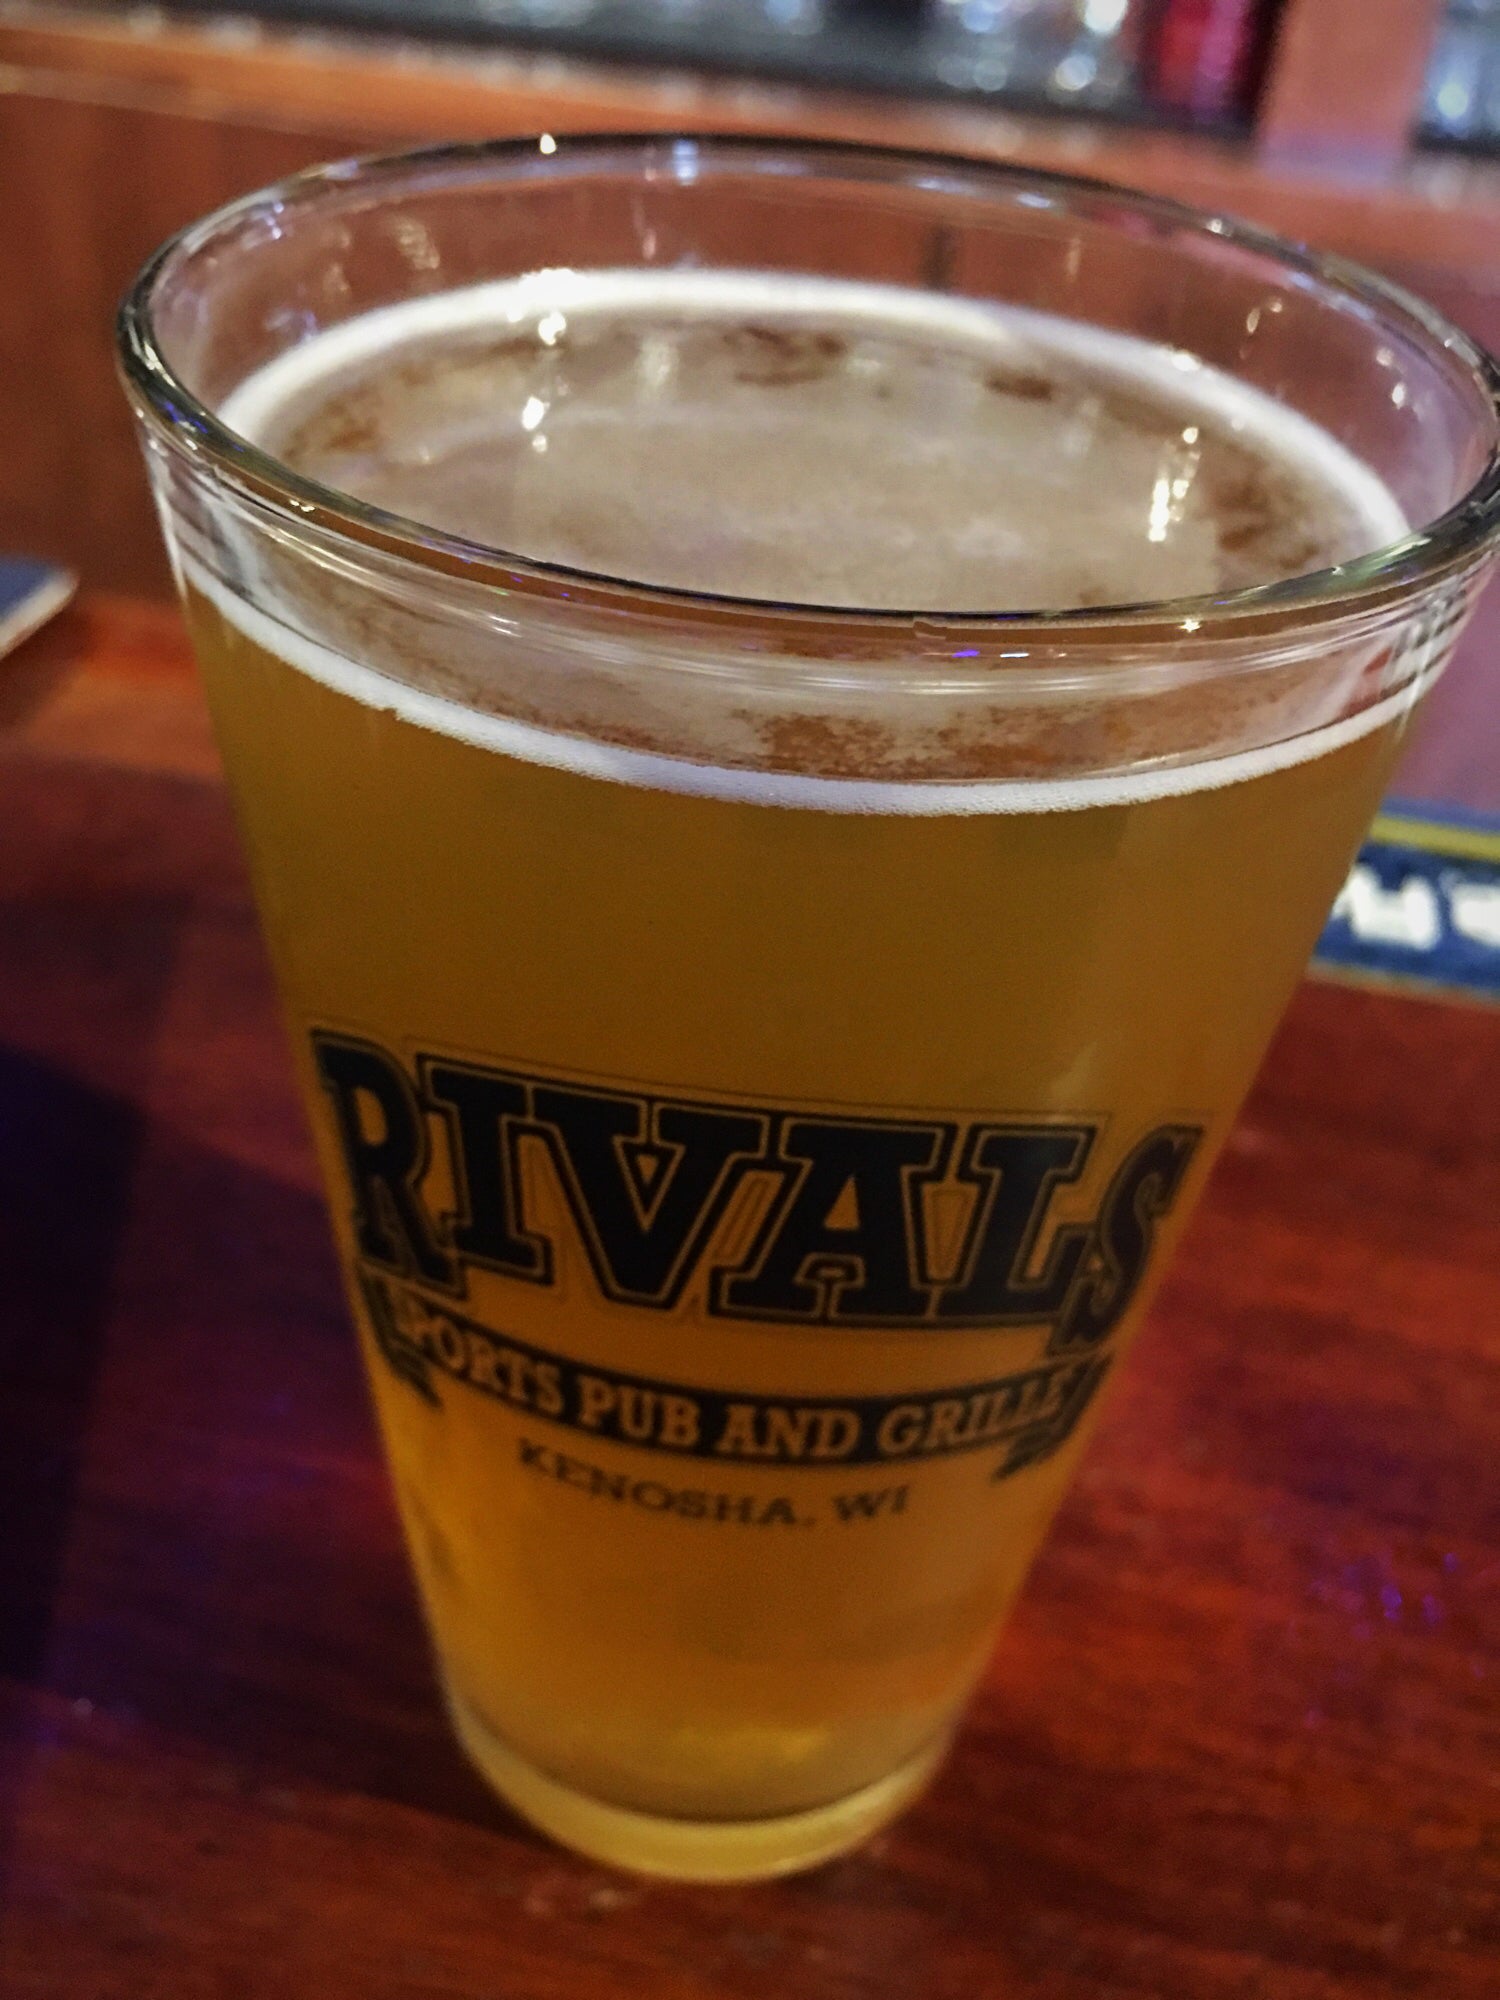 Rivals Sports Pub and Grille